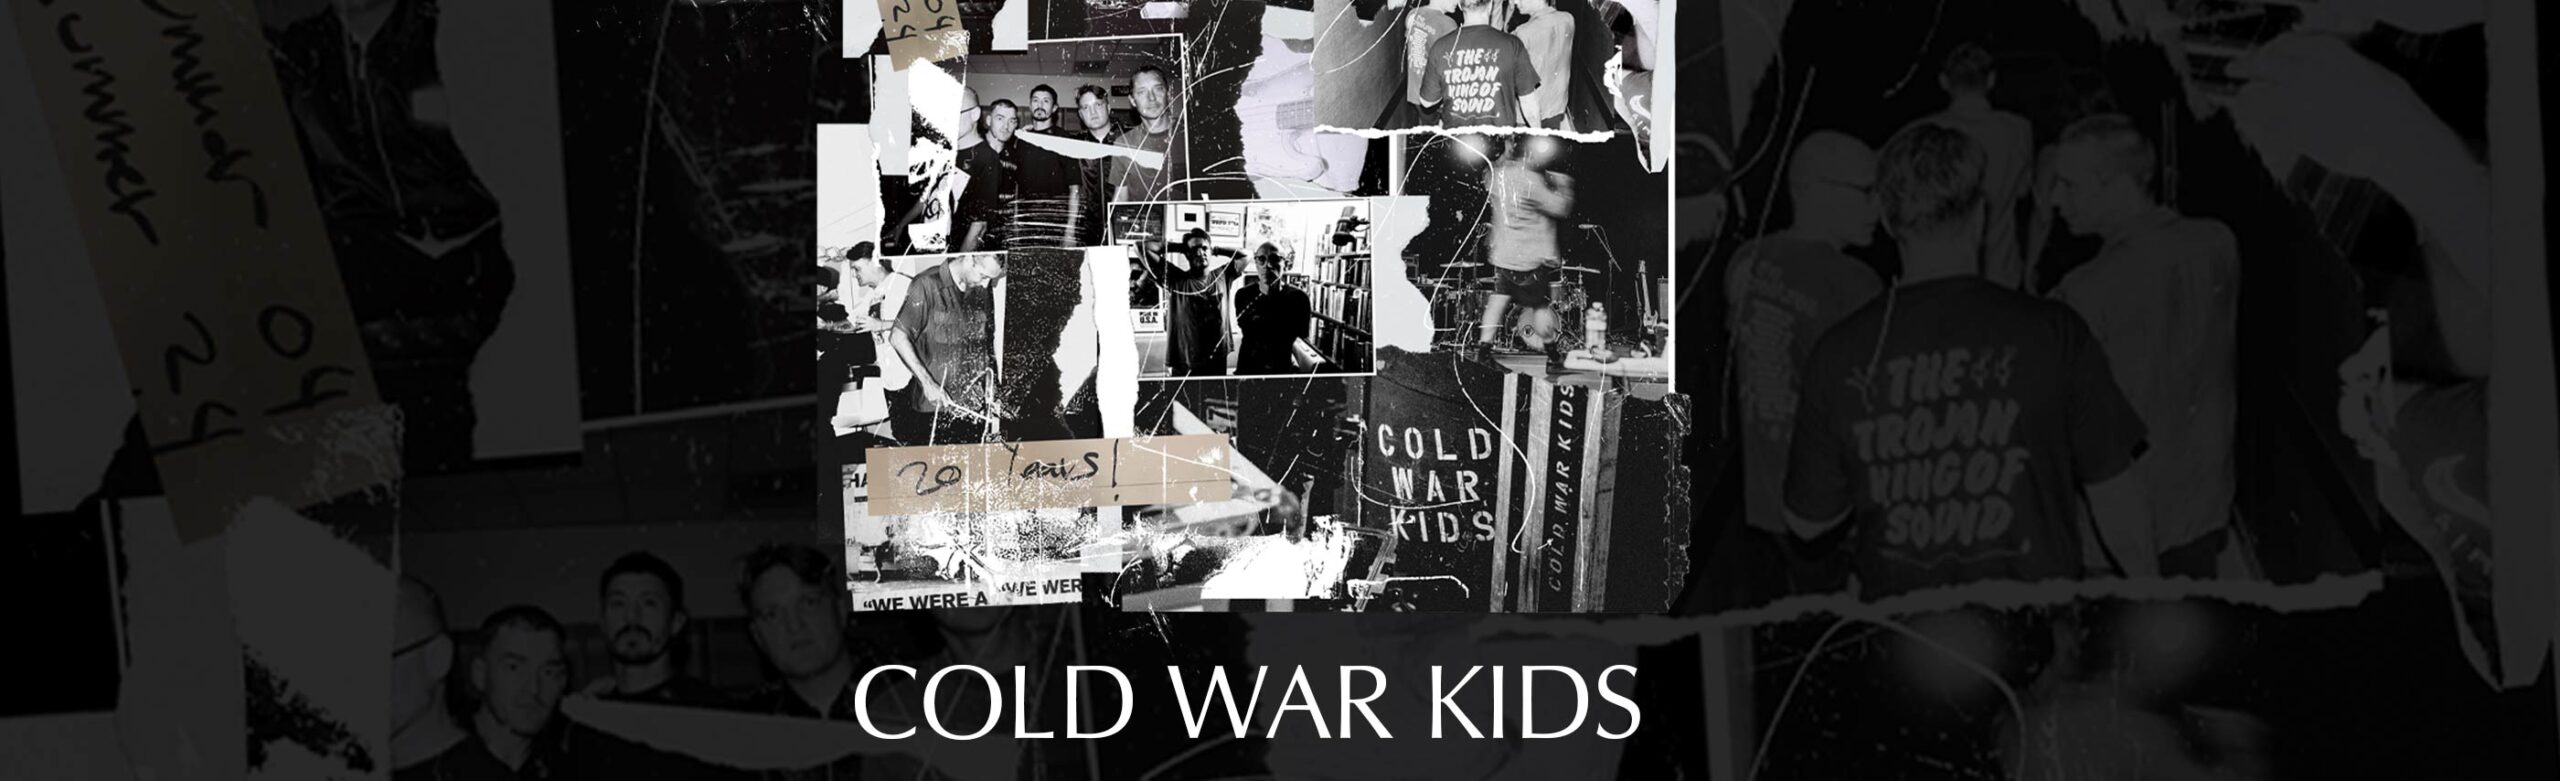 Cold War Kids Announce 20th Anniversary Concert at The ELM with Hovvdy Image